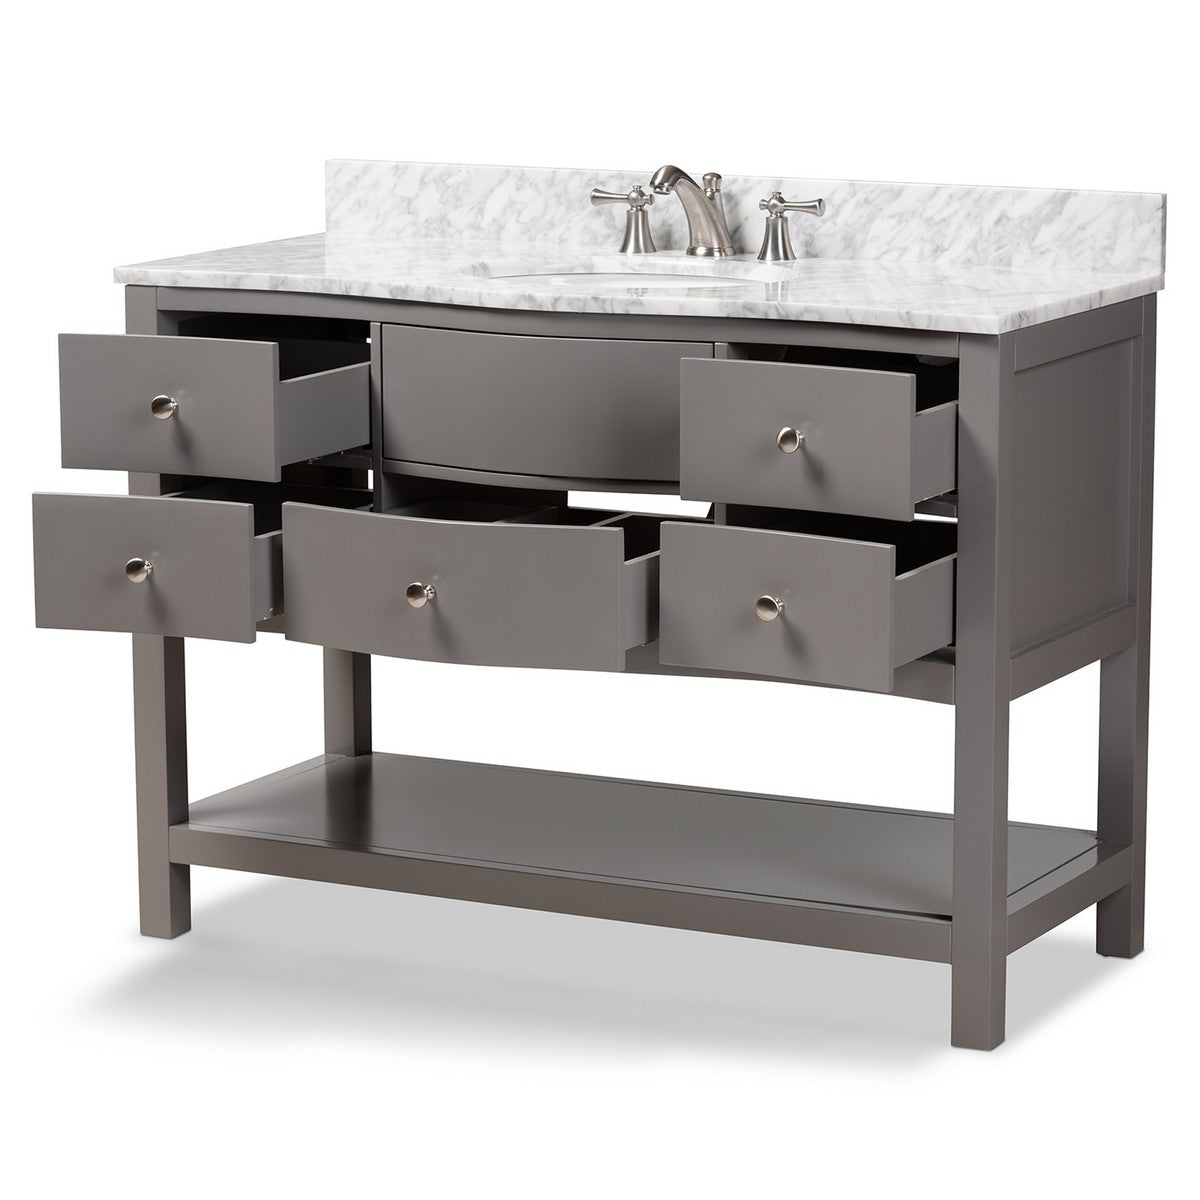 Baxton Studio Castie 48-Inch Modern and Contemporary Grey Finished Wood and Marble Single Sink Bathroom Vanity